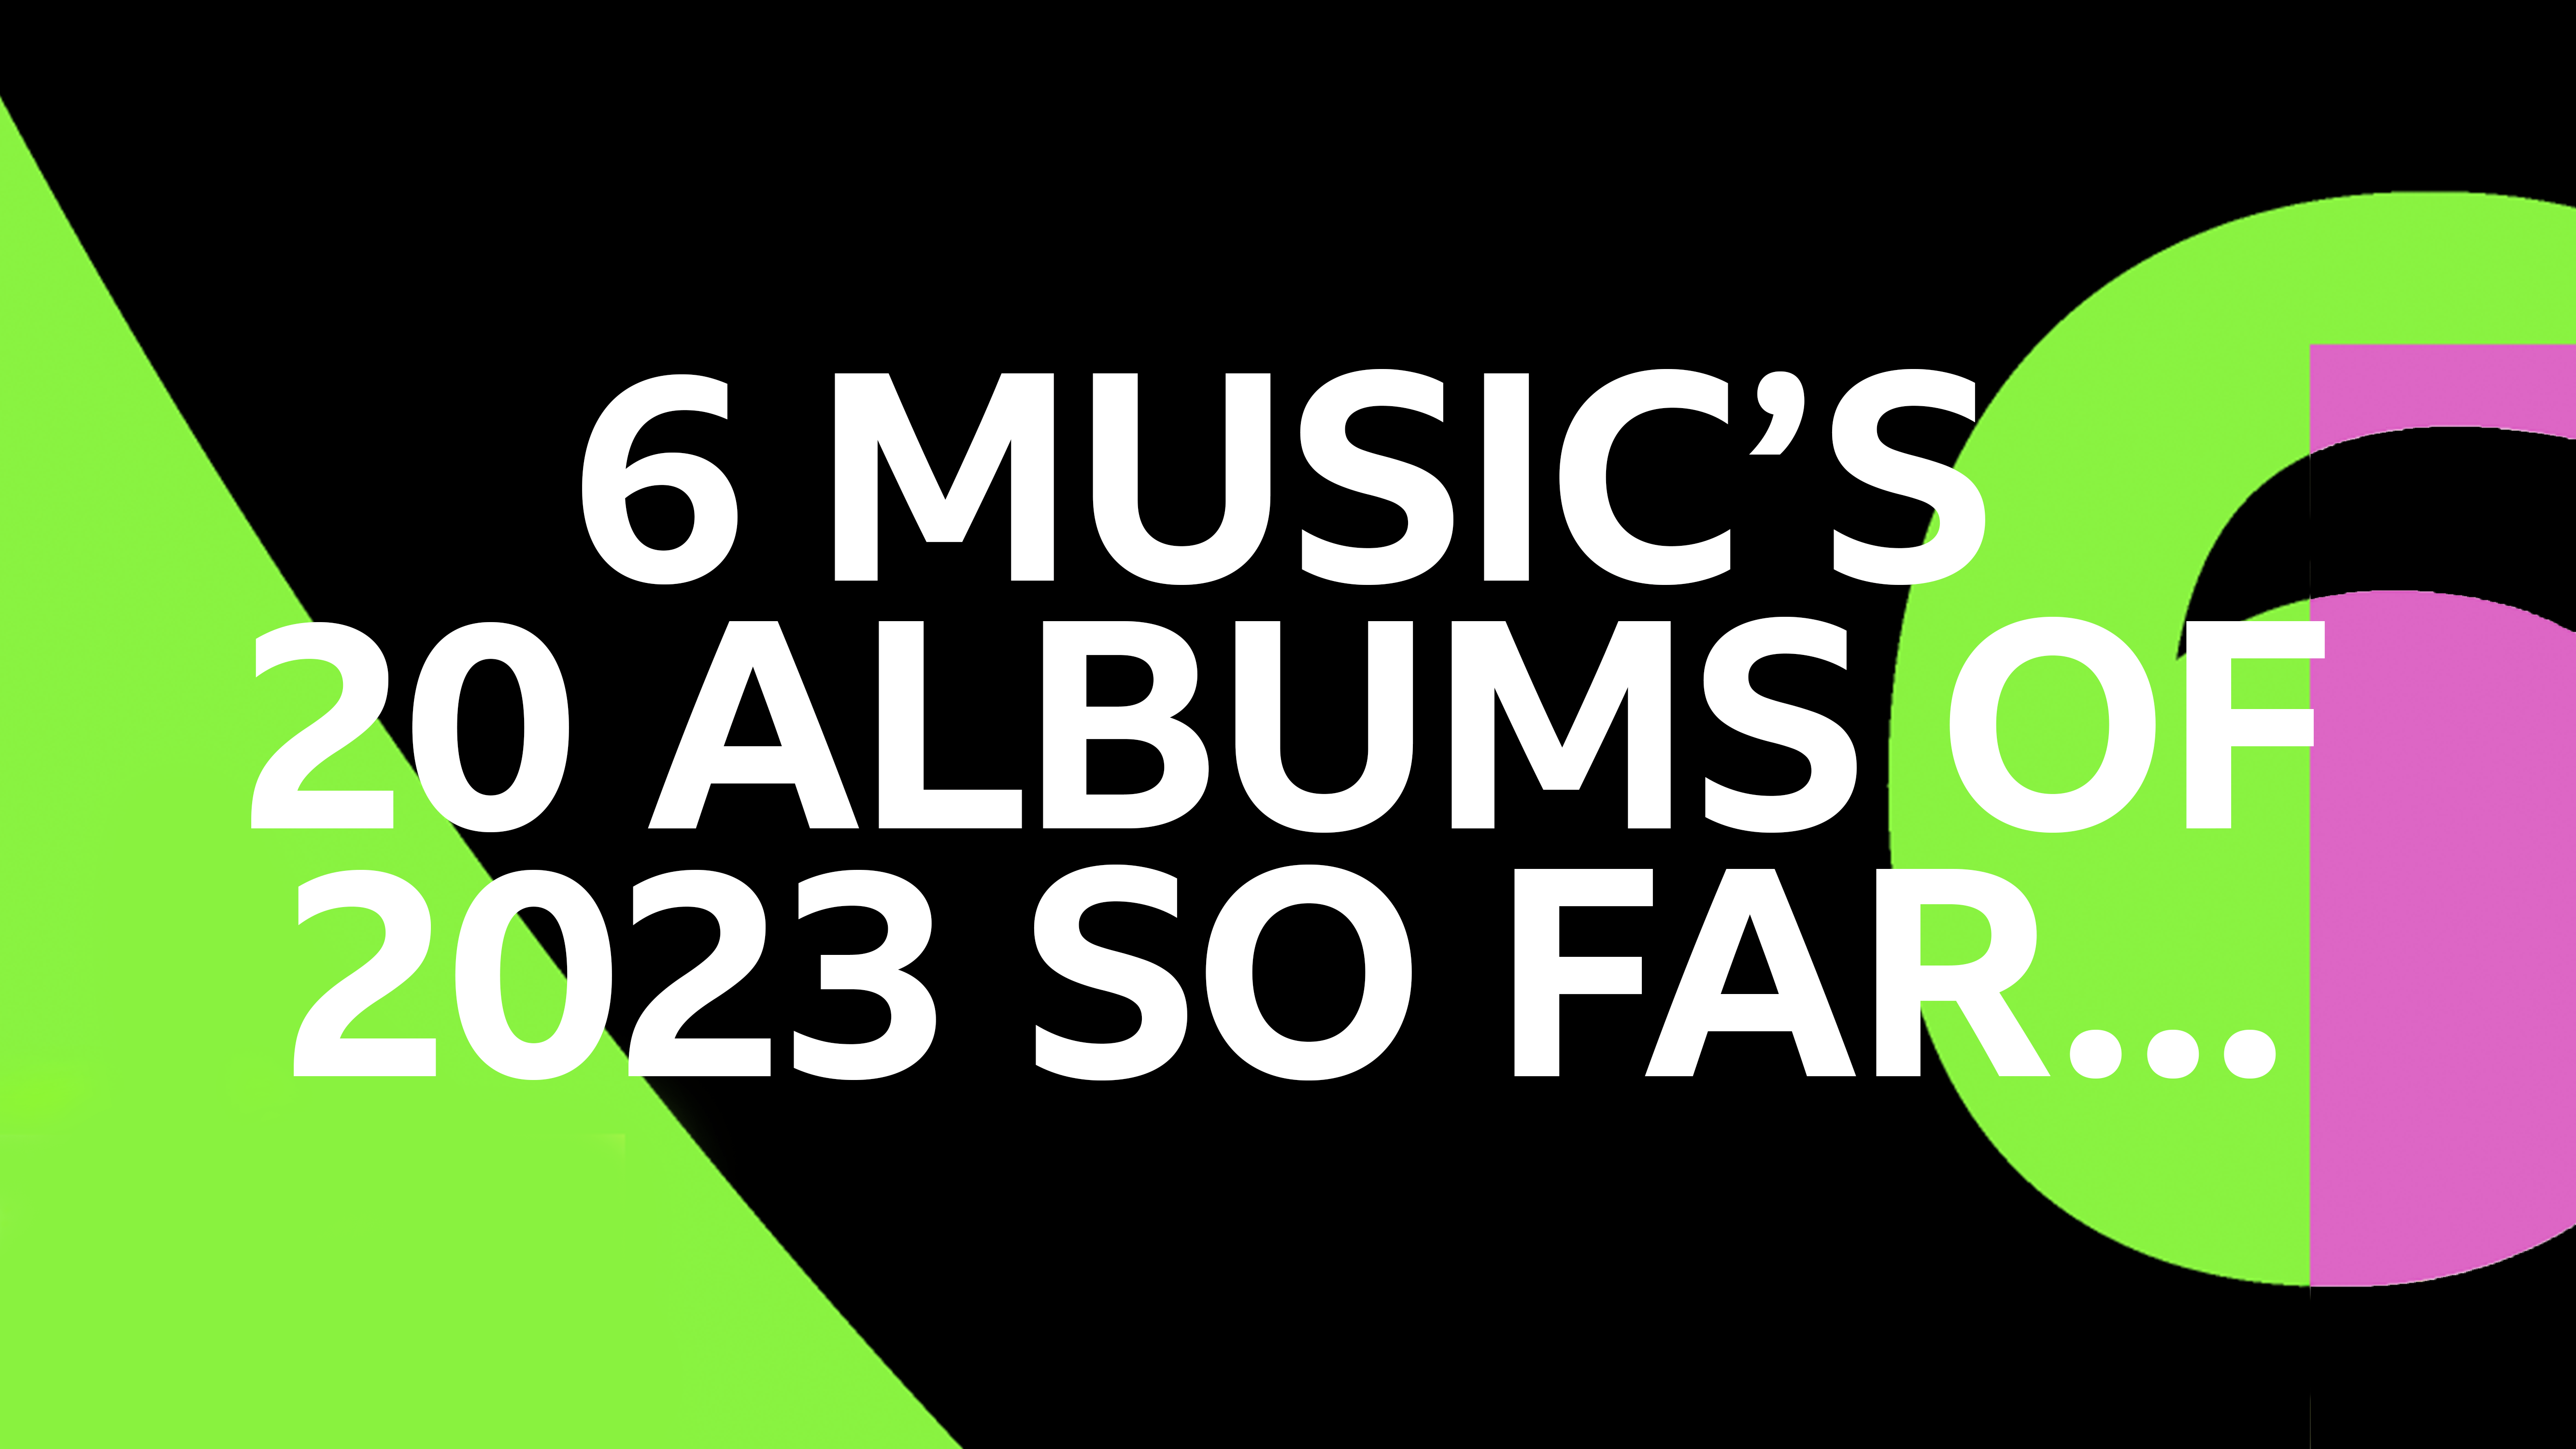 6 Music's albums of 2023 so far... Canvas